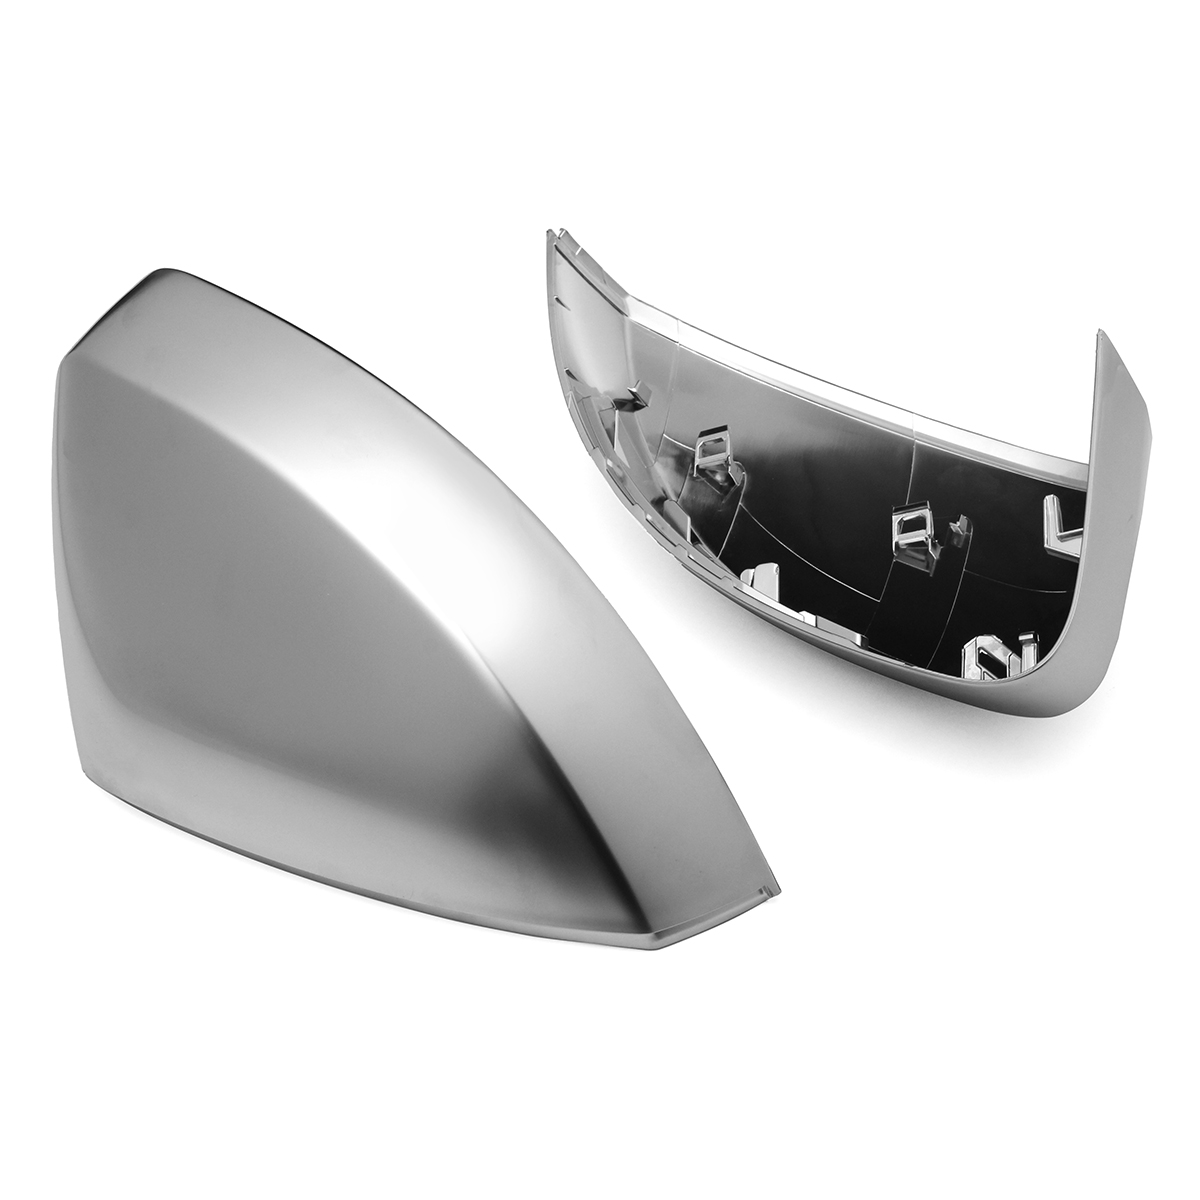 Matte Chrome Side Wing Mirror Replacement Cover Caps for Audi A3 S3 8V 20142018 eBay